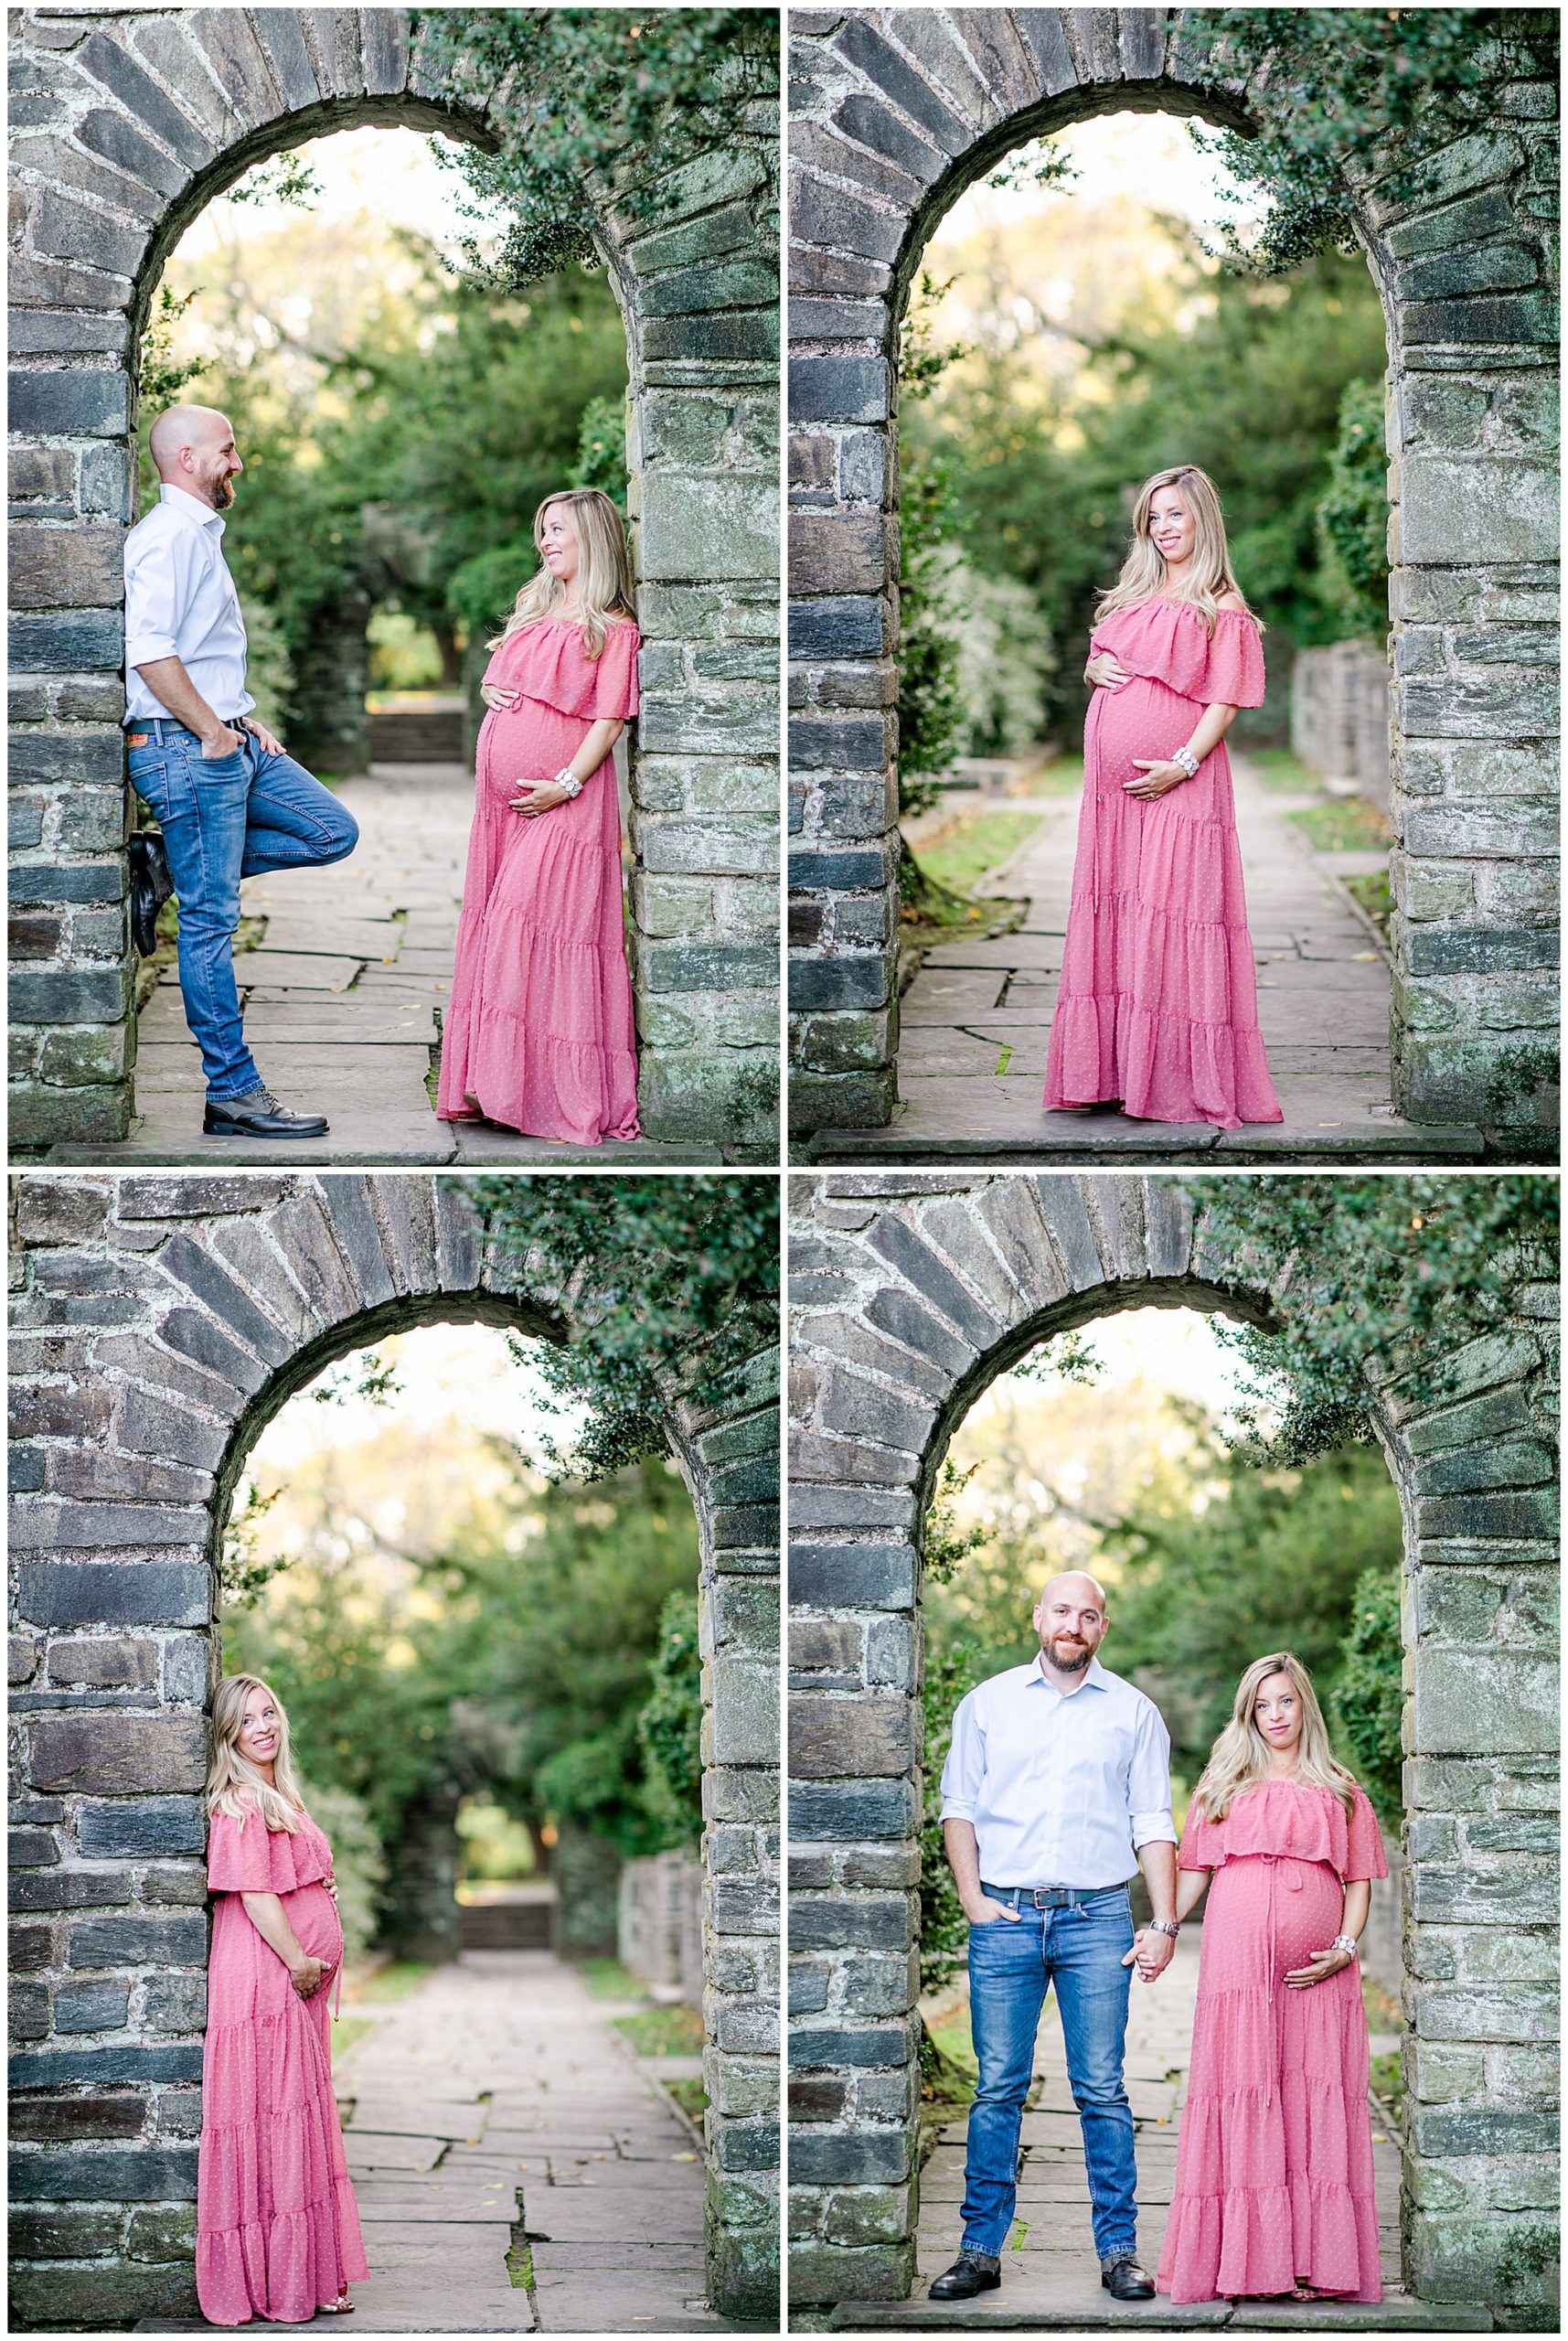 Glenview Mansion maternity session, Glenview Mansion photographer, Glenview Mansion photos, natural light maternity photos, maternity photos outfit ideas, DC photo shoot locations, DC wedding venue, Maryland wedding venue, autumn maternity photos, Rachel E.H. Photography, couple under archway, couple leaning against archway